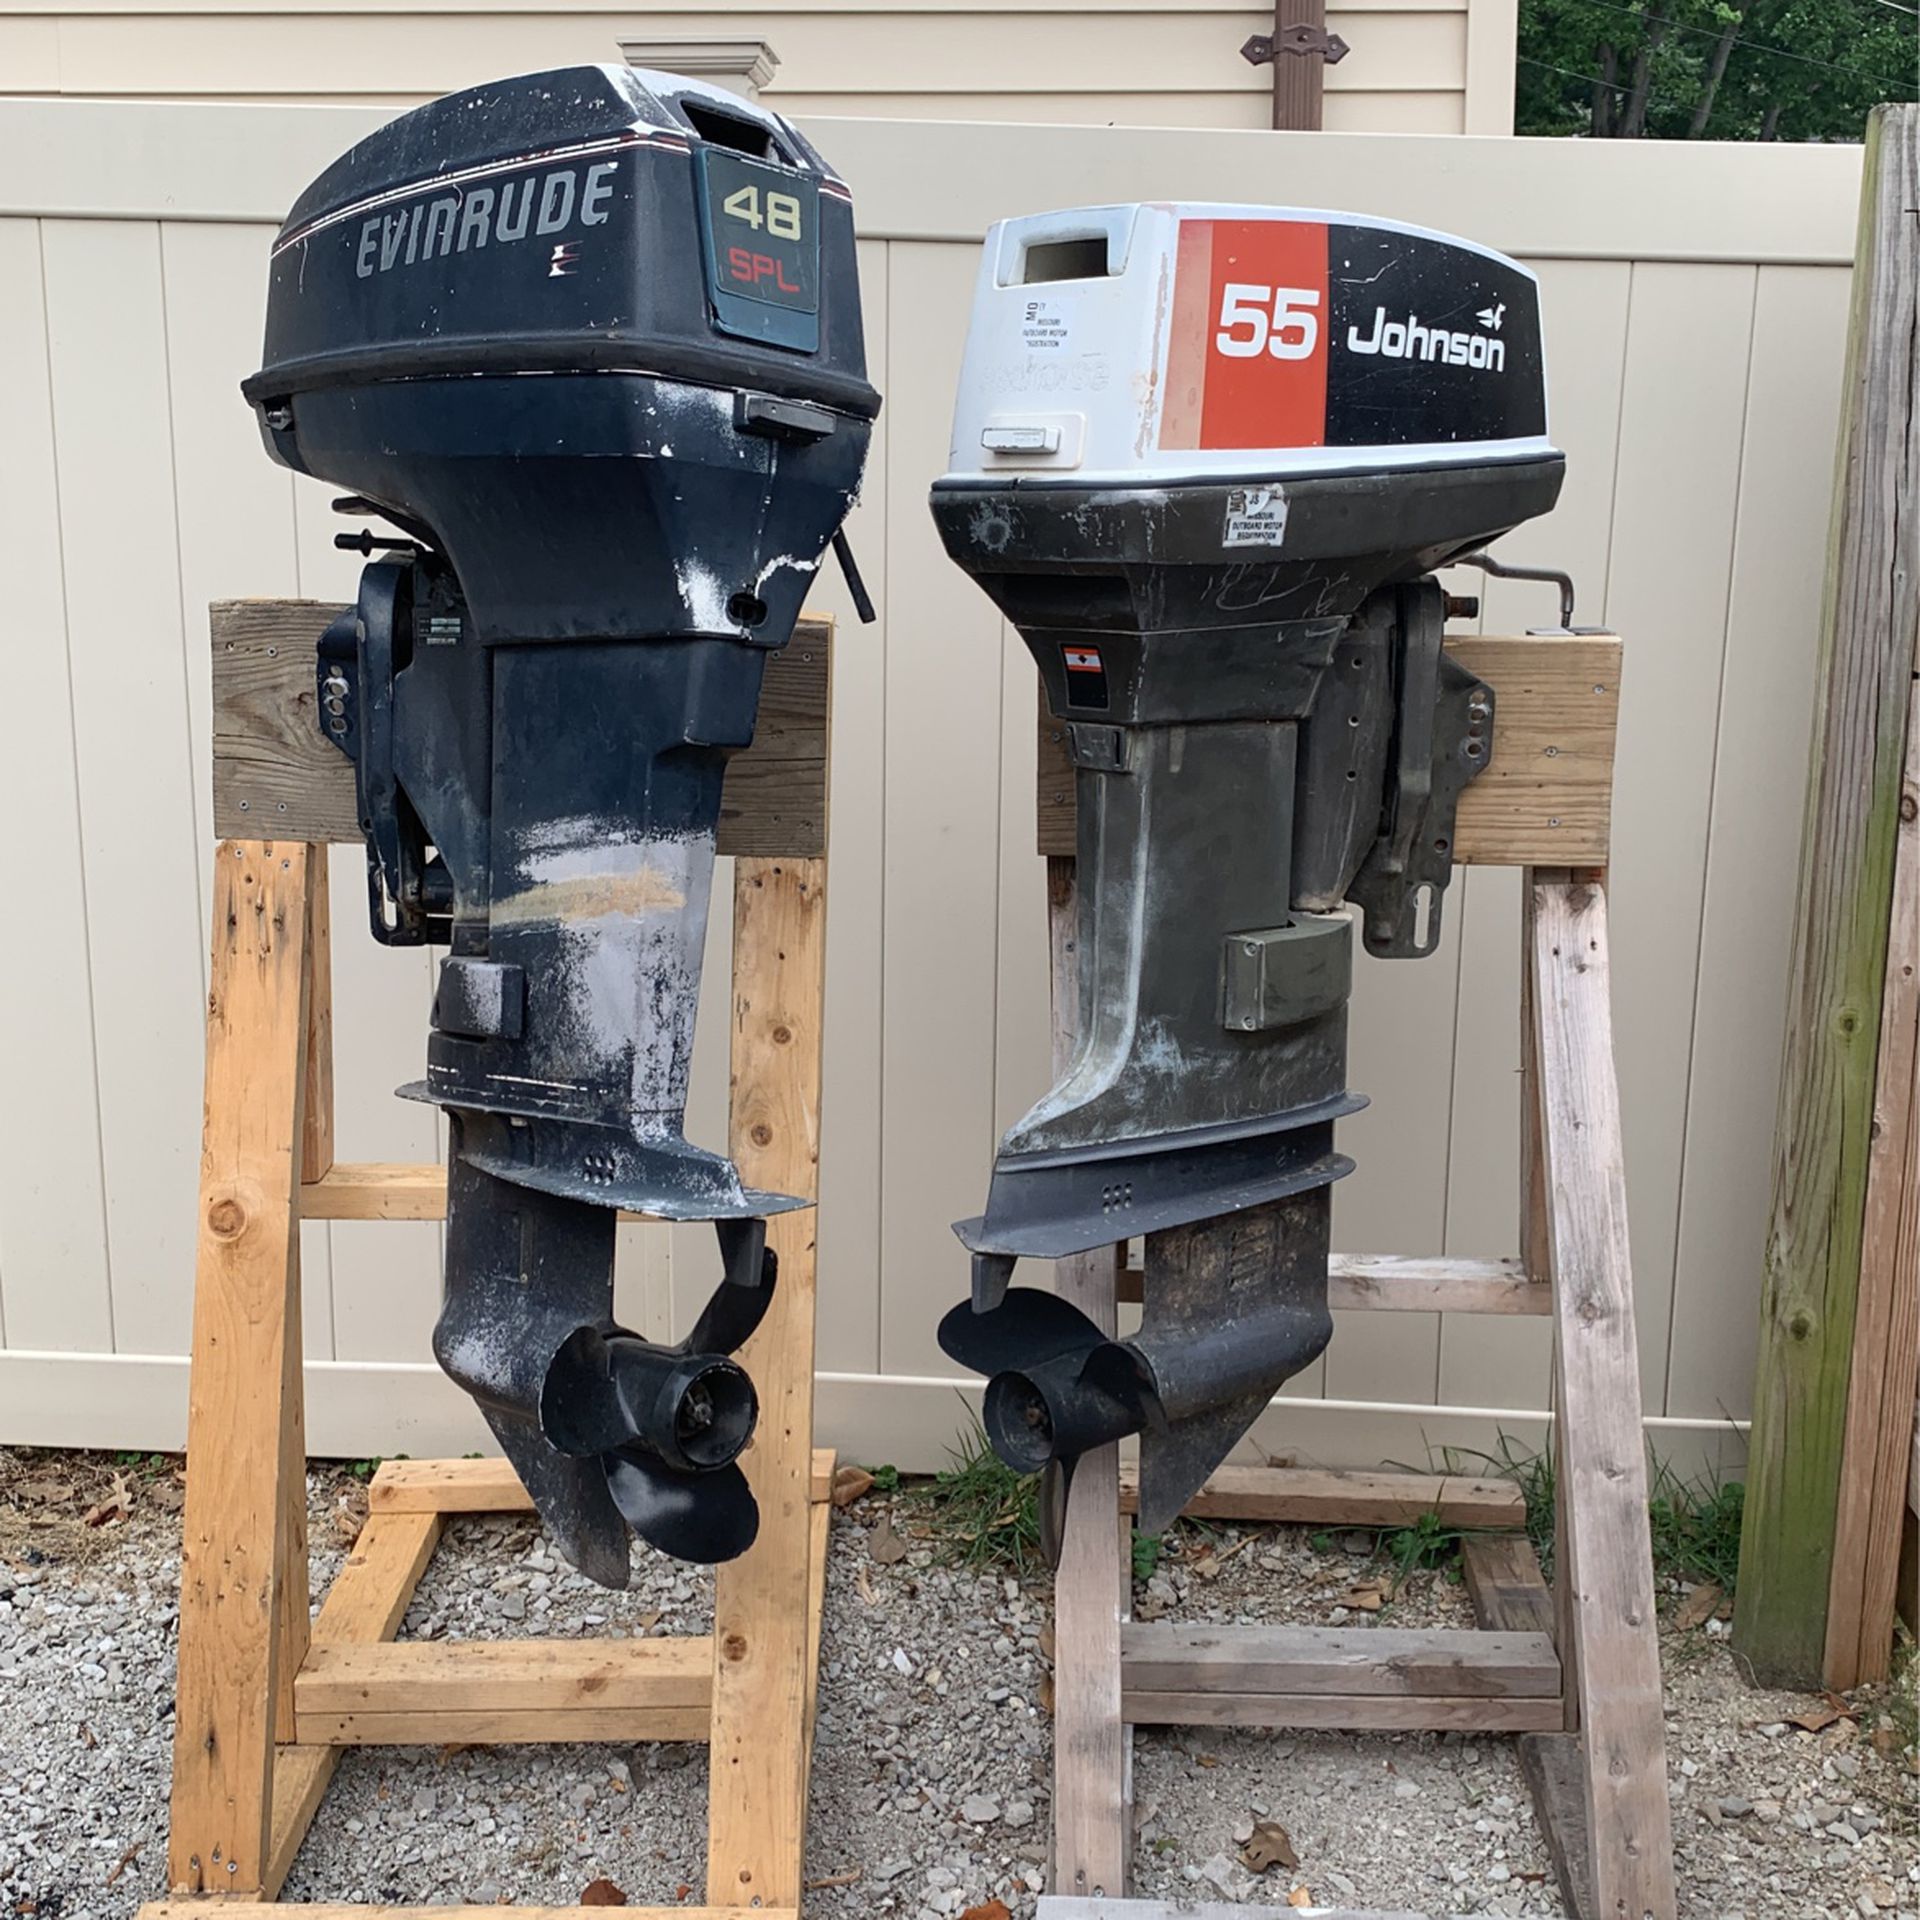 2 Outboard Motors For Sale  